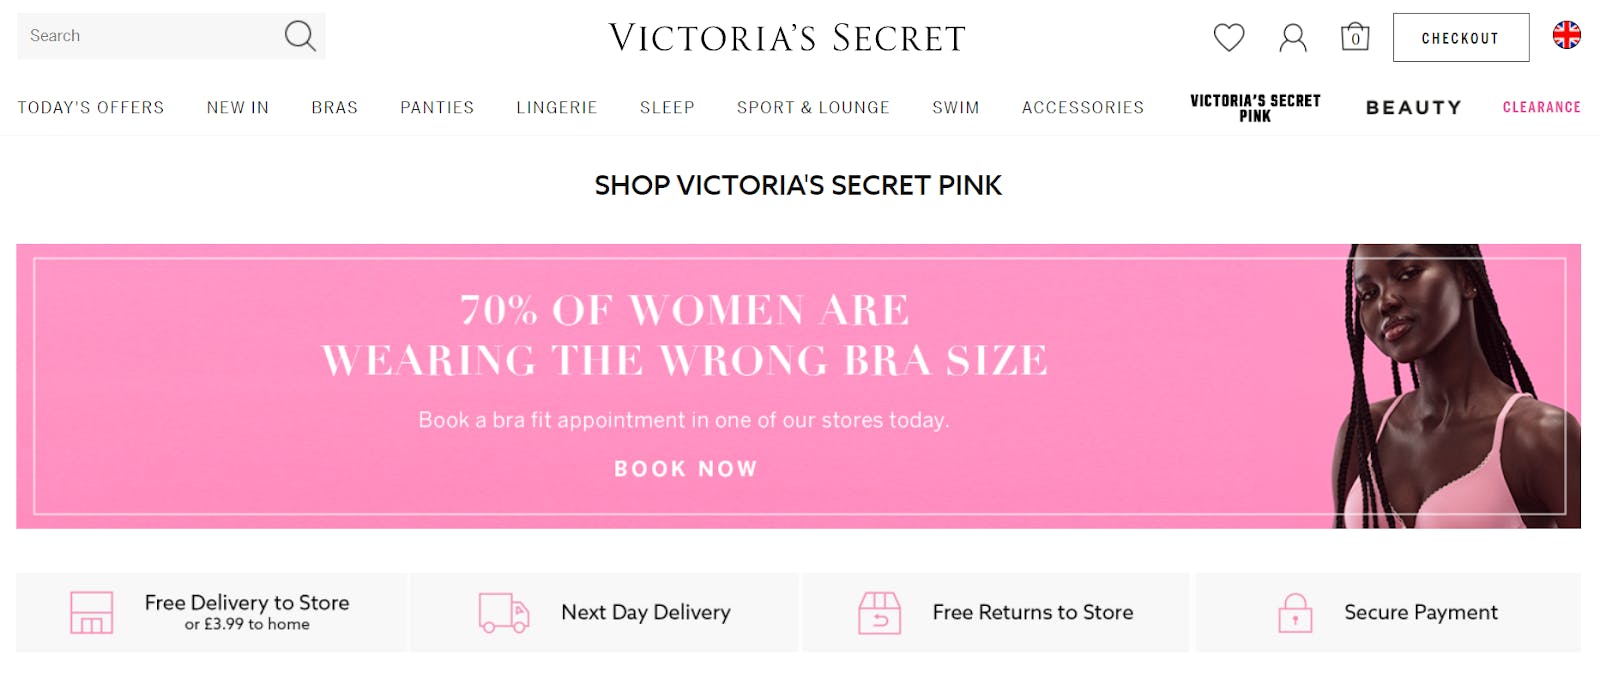 The Victoria's Secret membership signup page.